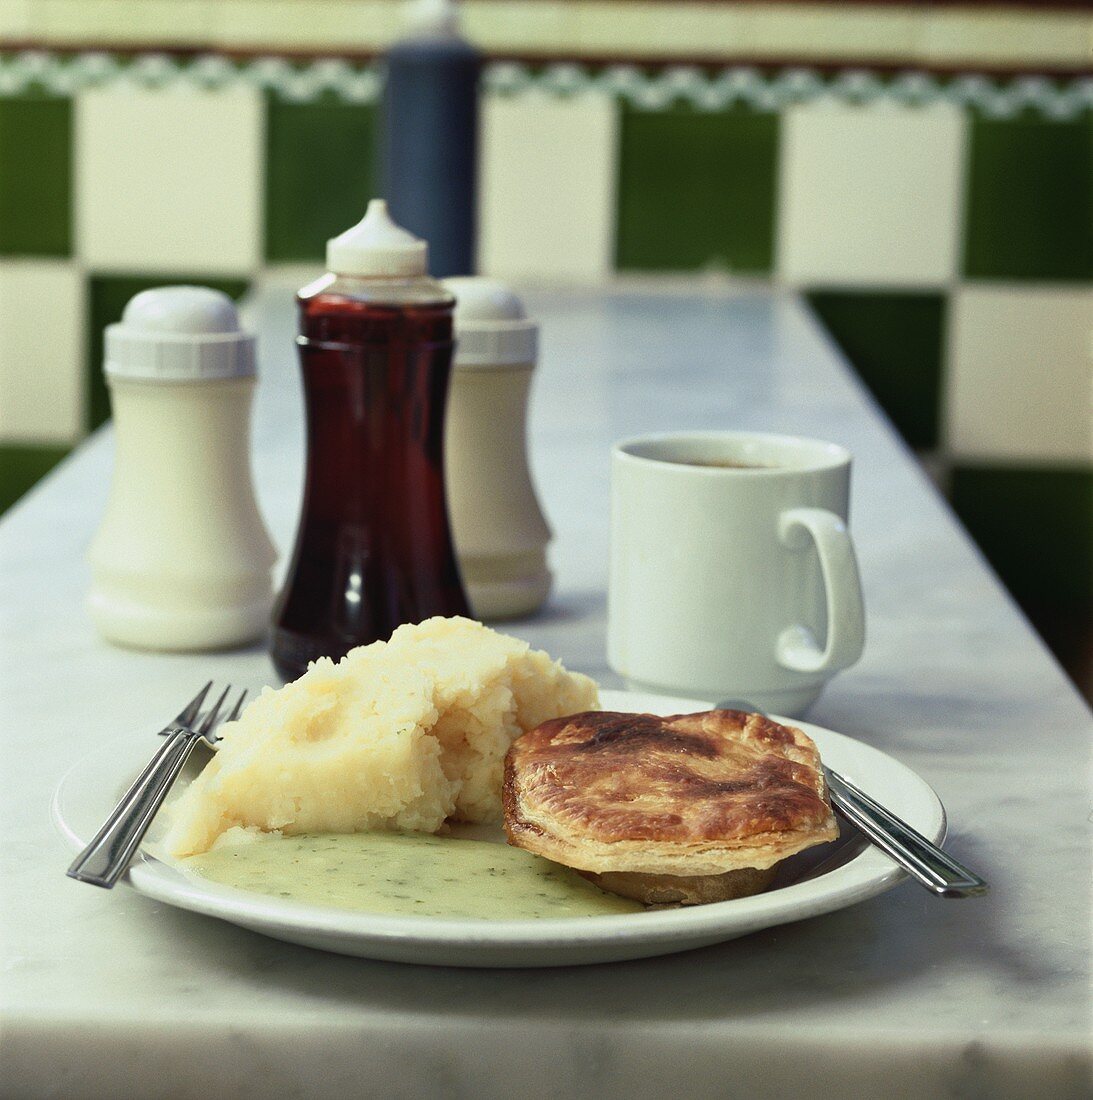 Pie and mash (Minced beef pie with mashed potato, England)